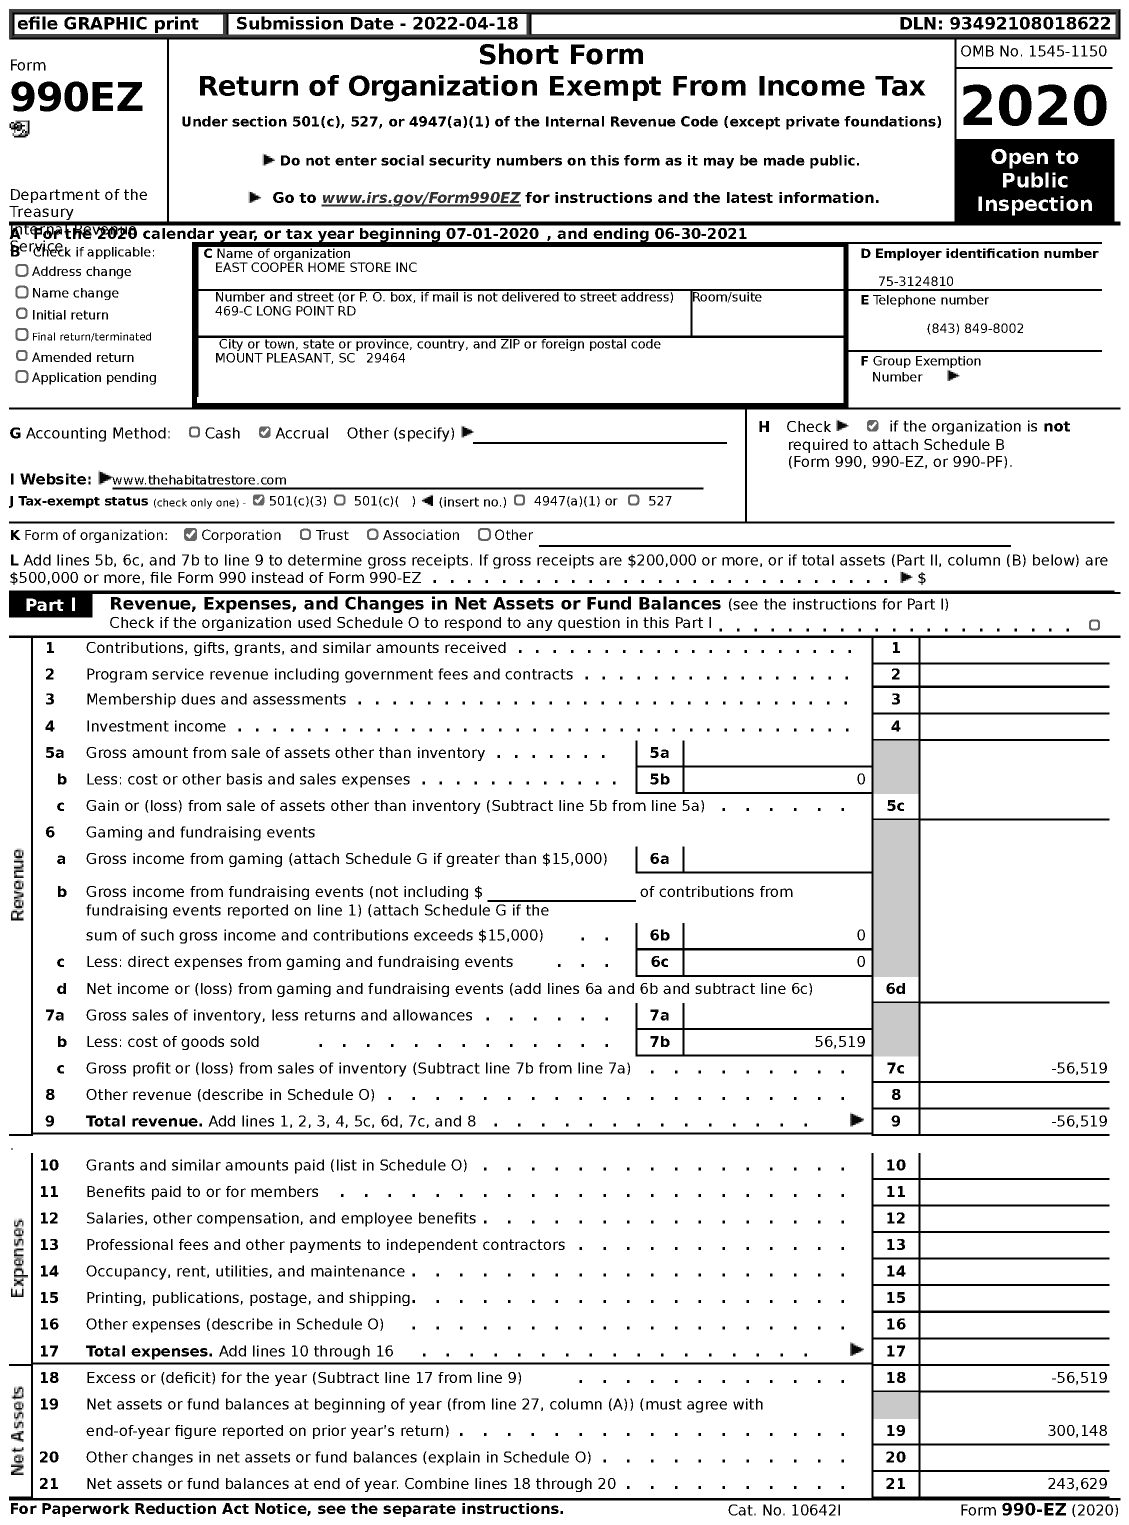 Image of first page of 2020 Form 990EZ for East Cooper Home Store